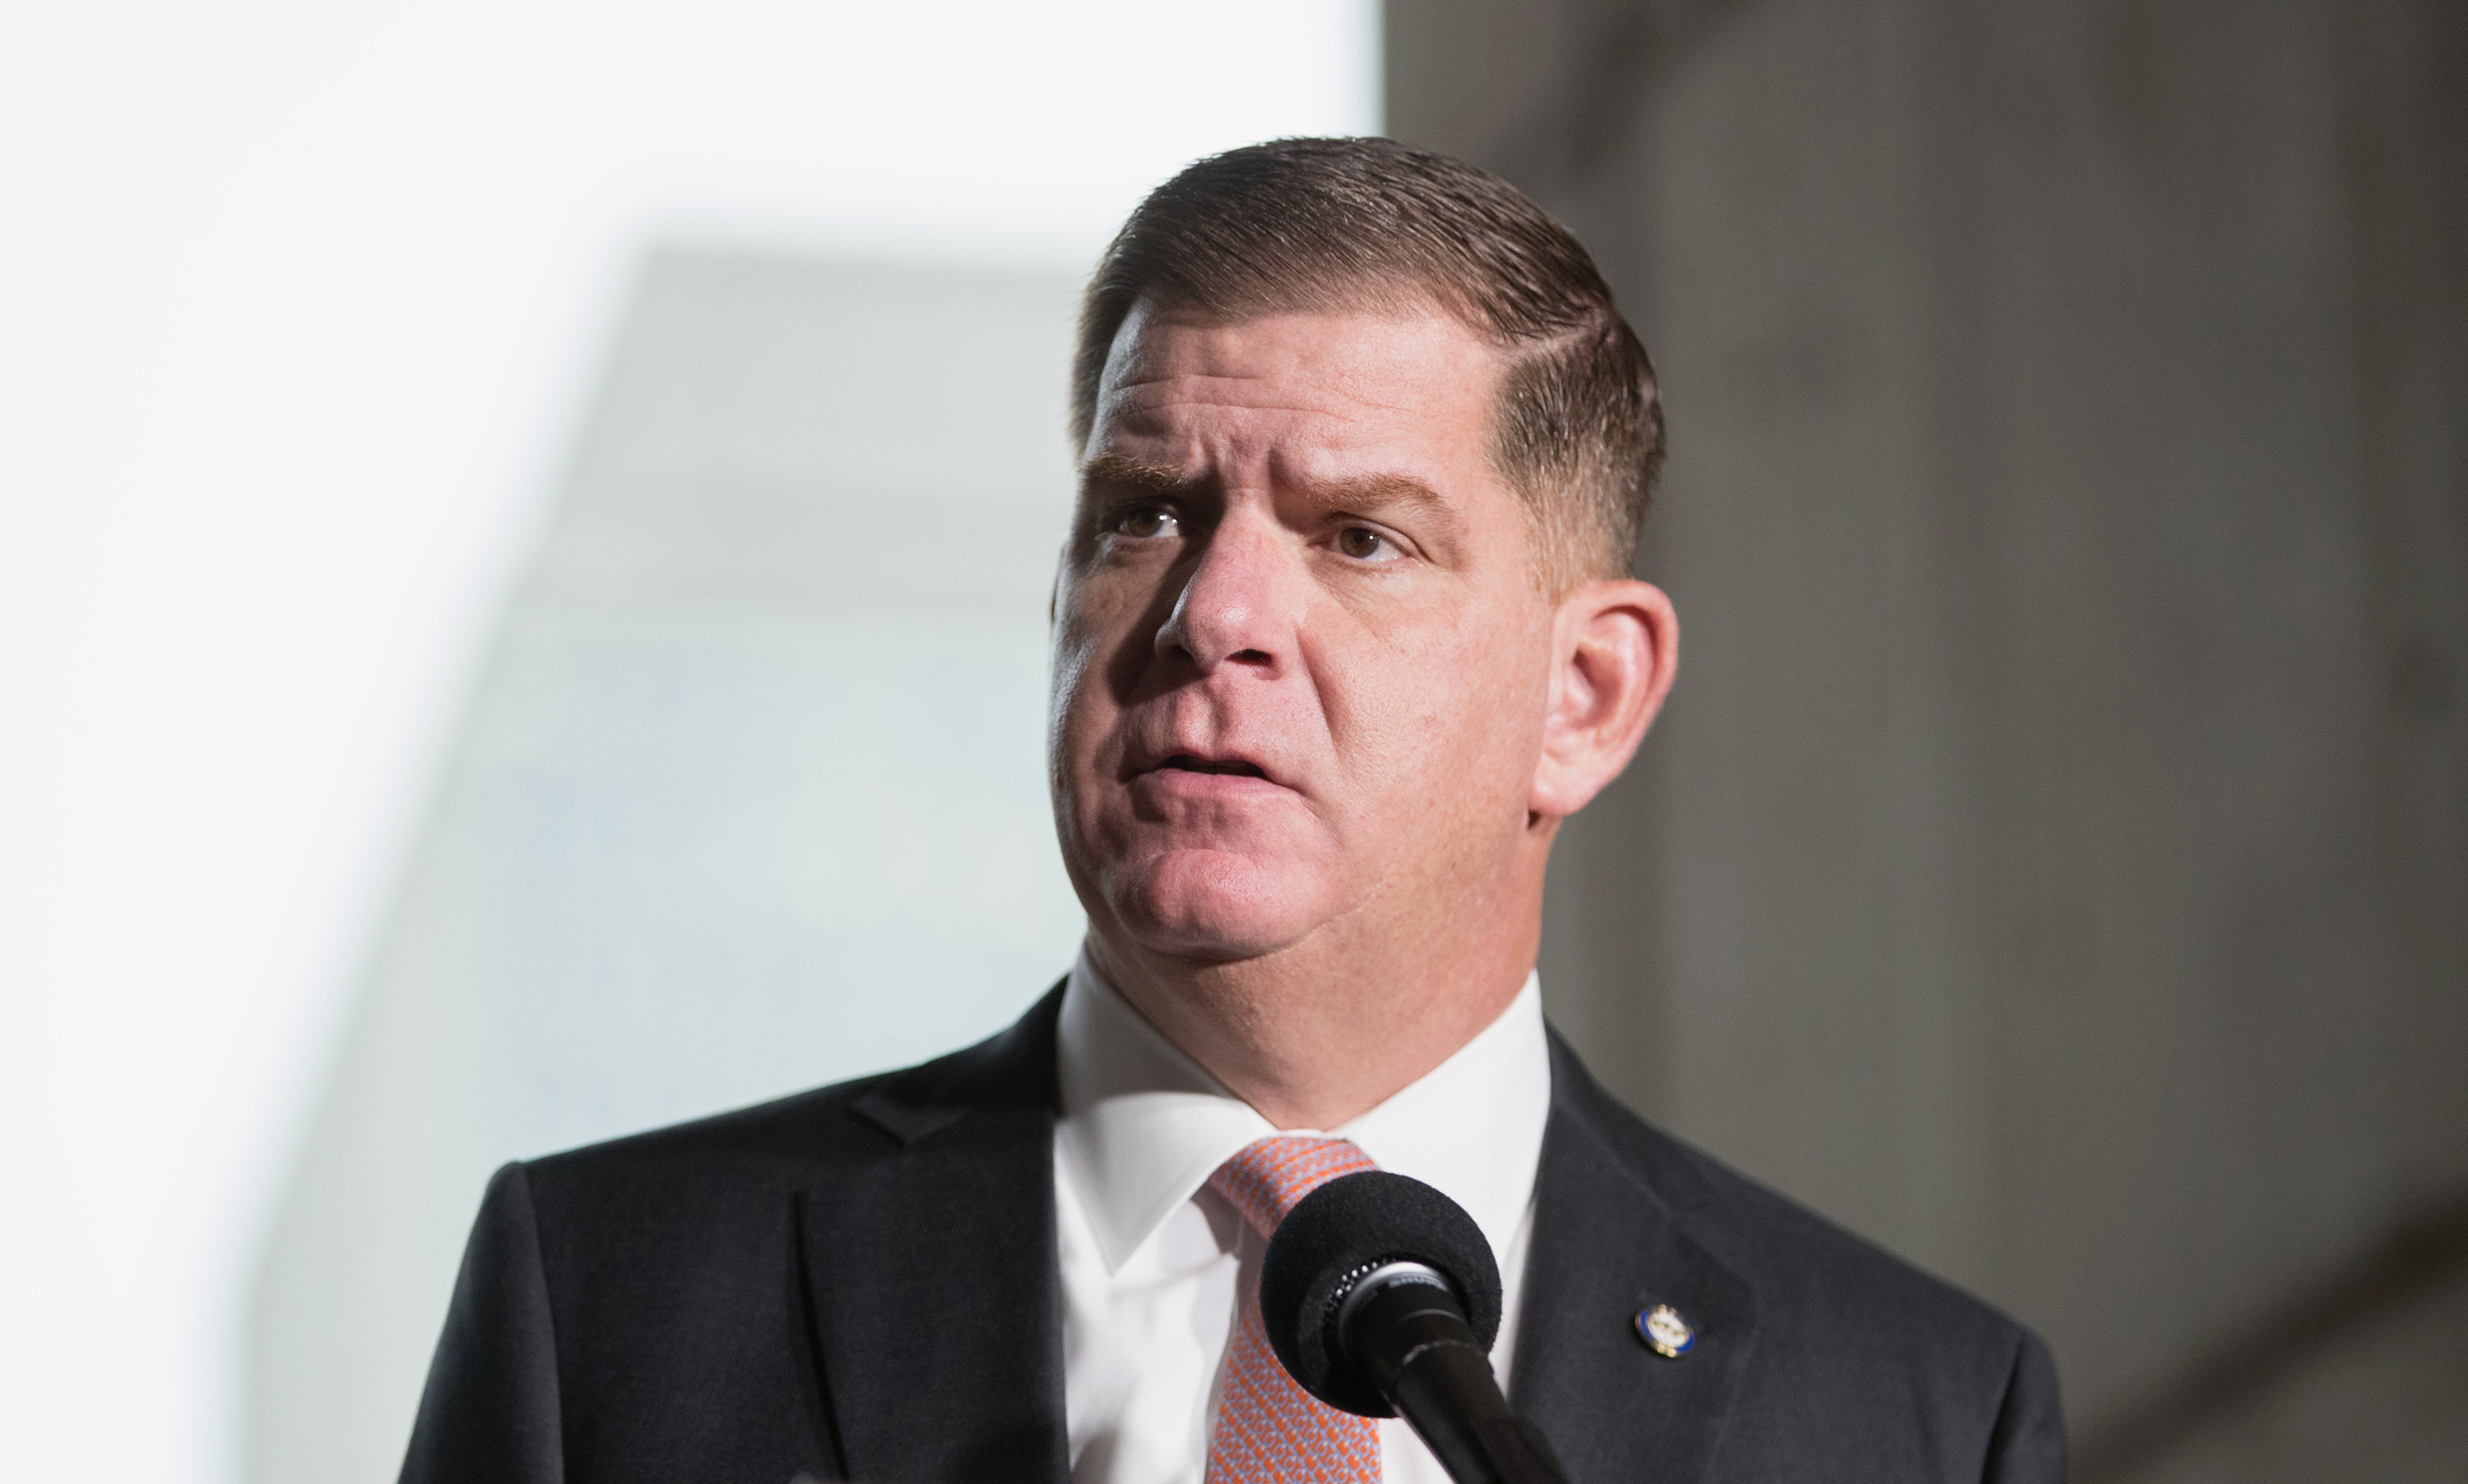 Boston Mayor Marty Walsh speaks at a press conference on March 13 in Boston, Massachusetts. 